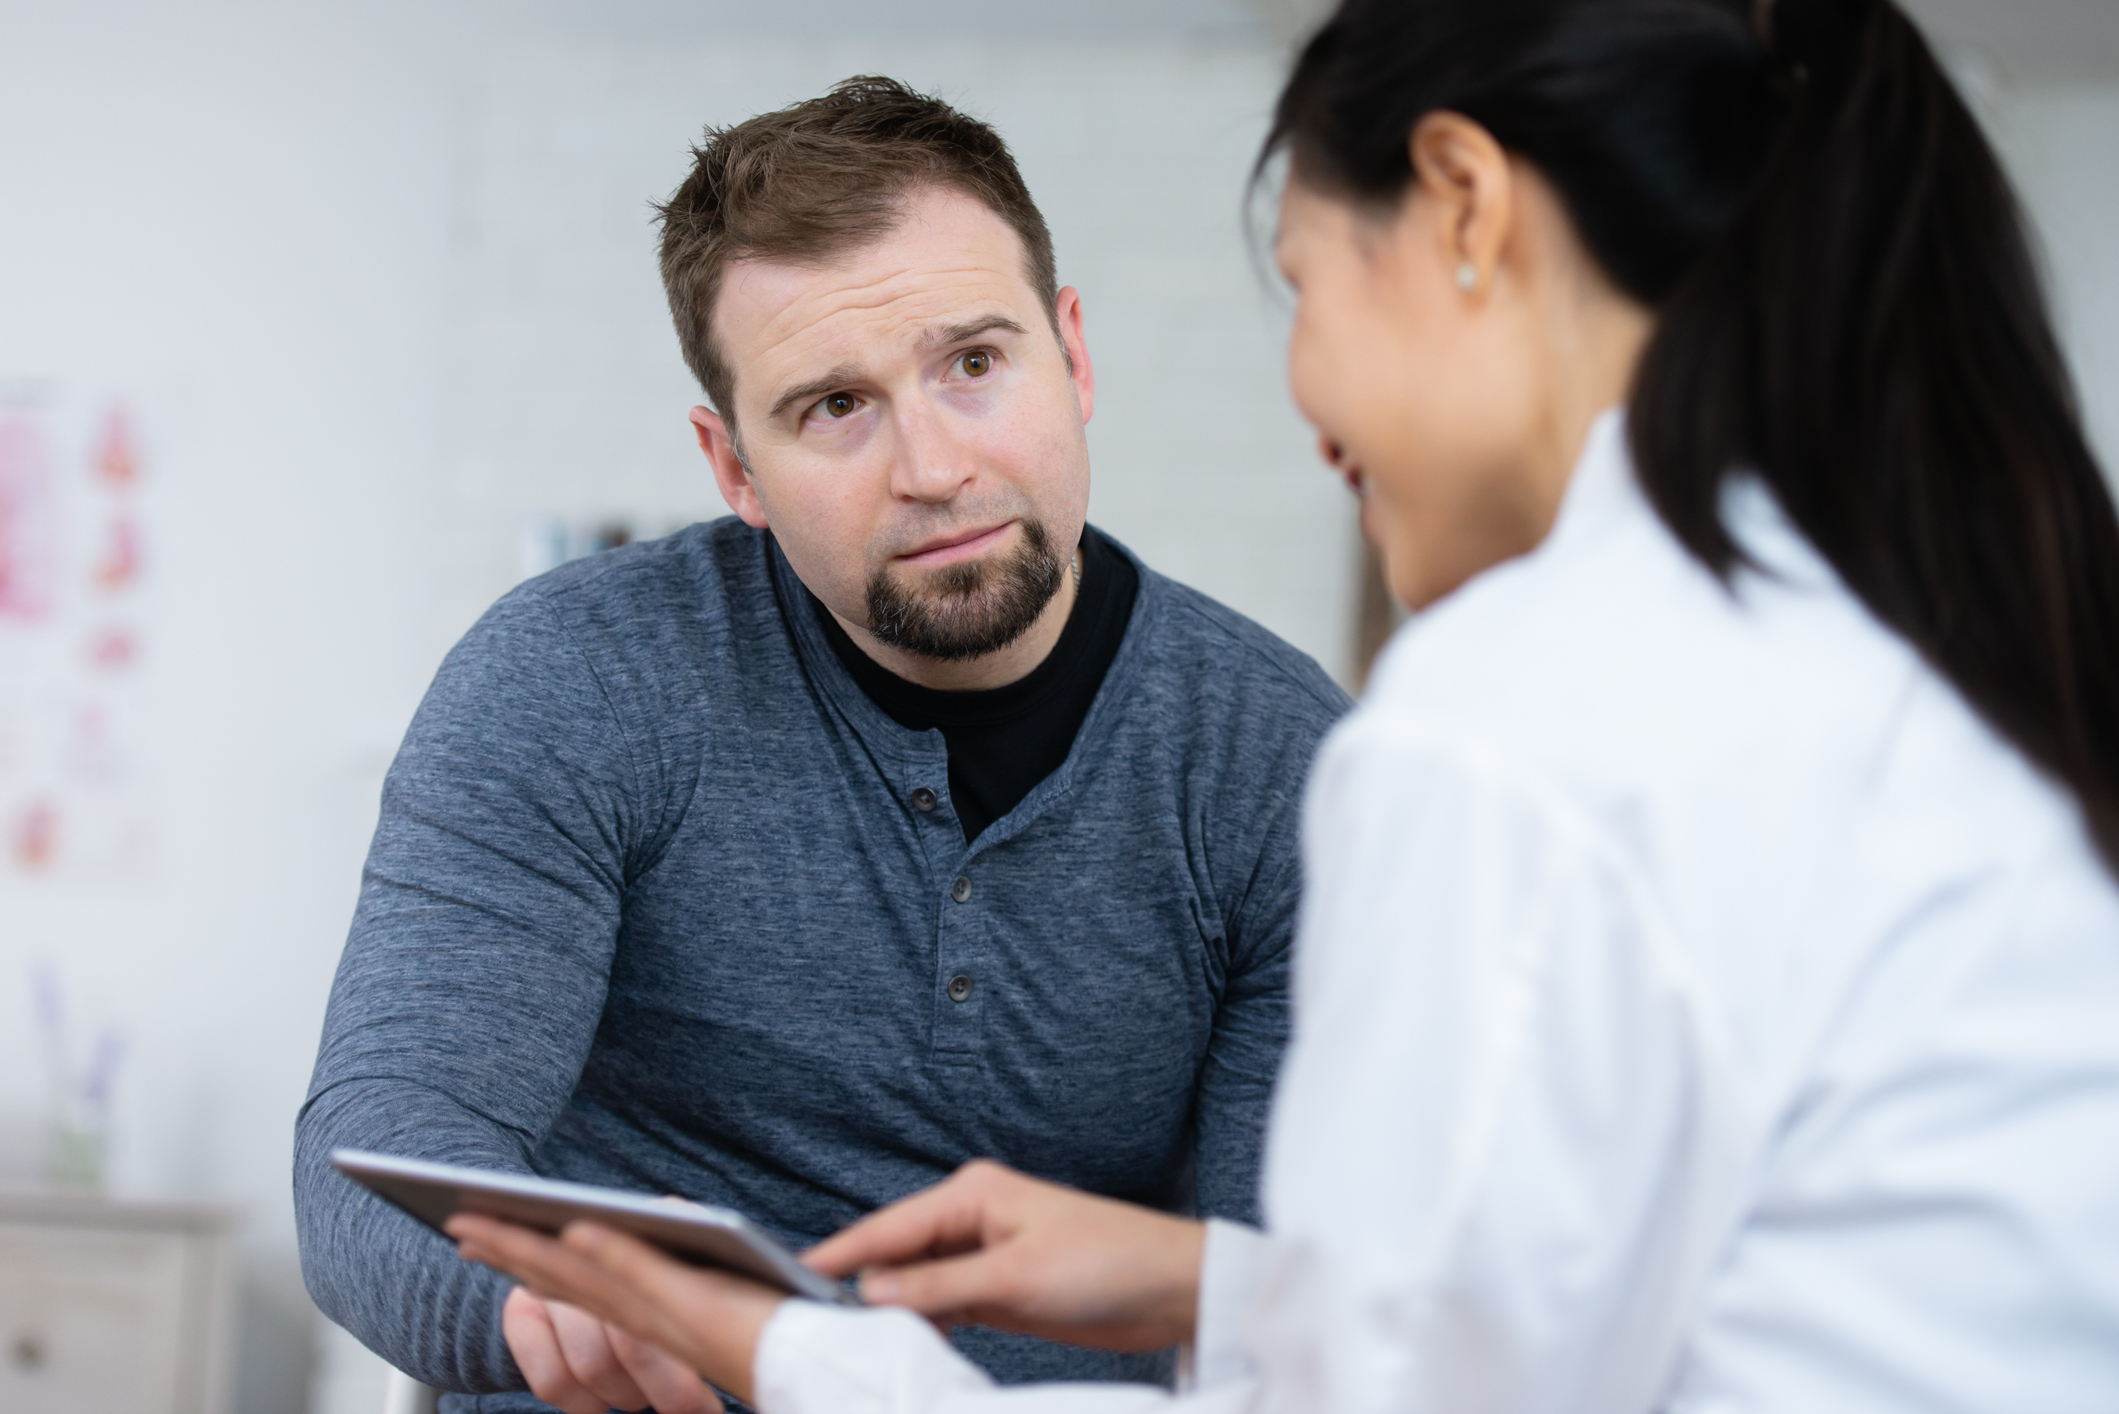 Hemwell Doctor Talking to Patient about hemorrhoids